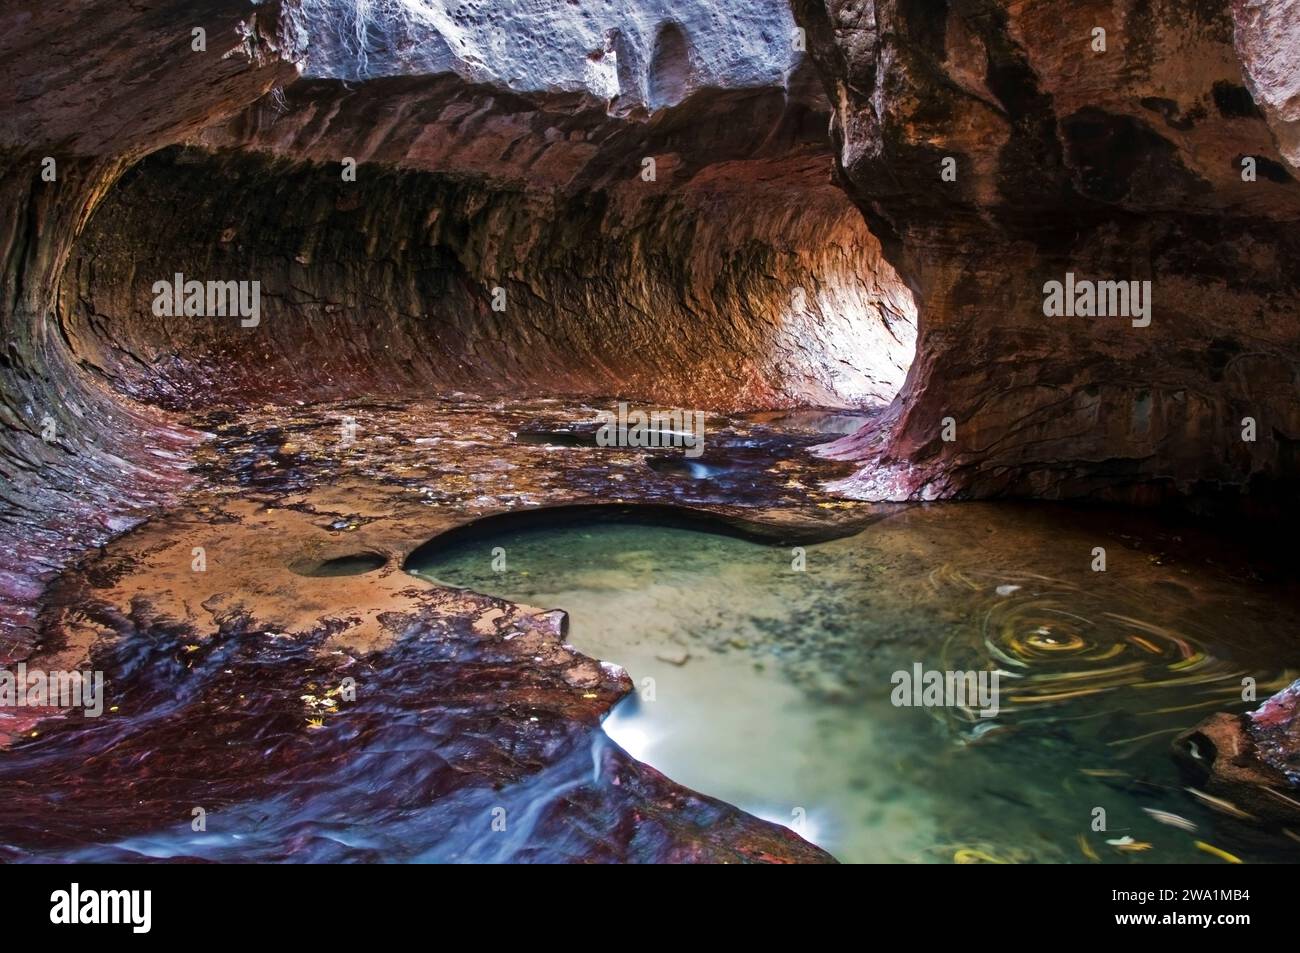 Fall leaves swirl in a pool of water in the Subway Canyon in Zion National Park, Utah. Stock Photo